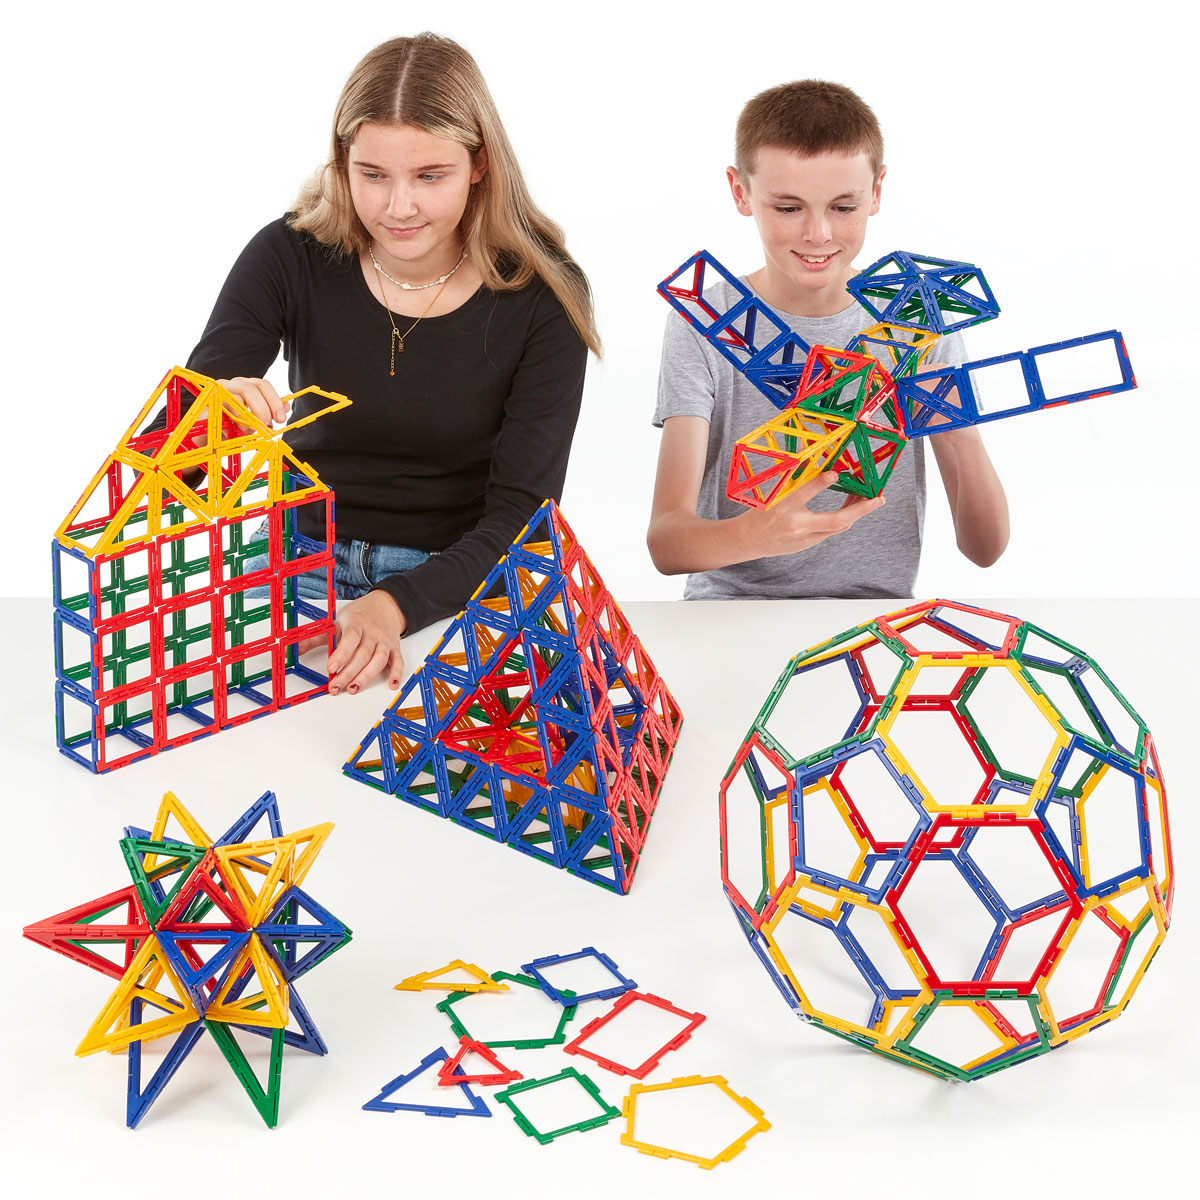 mostly new in package, 2 used shapes Polydron Frameworks